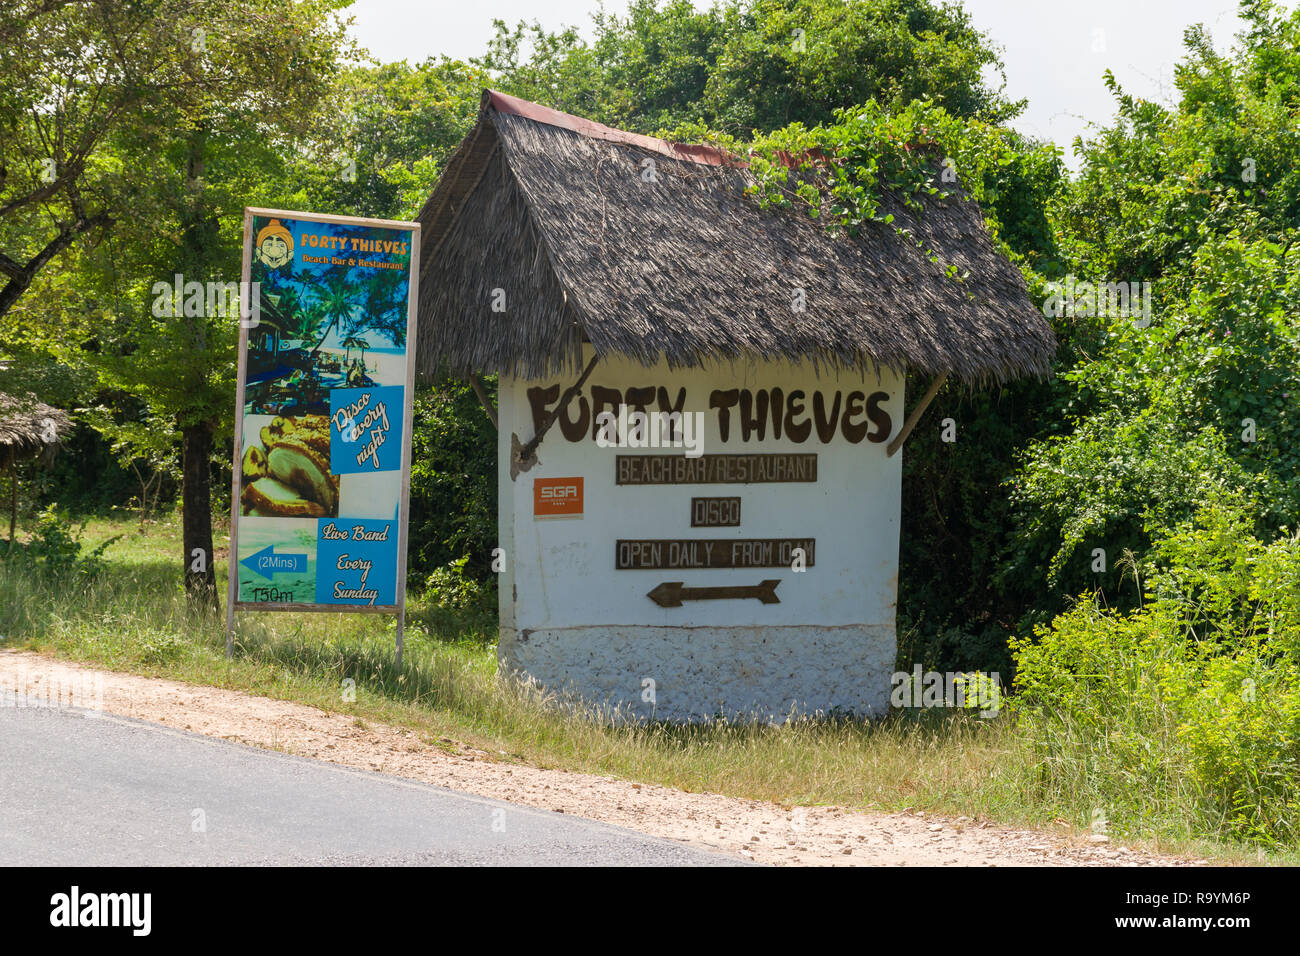 A large roadside sign for the Forty Thieves beach bar and restaurant, Diani, Kenya Stock Photo